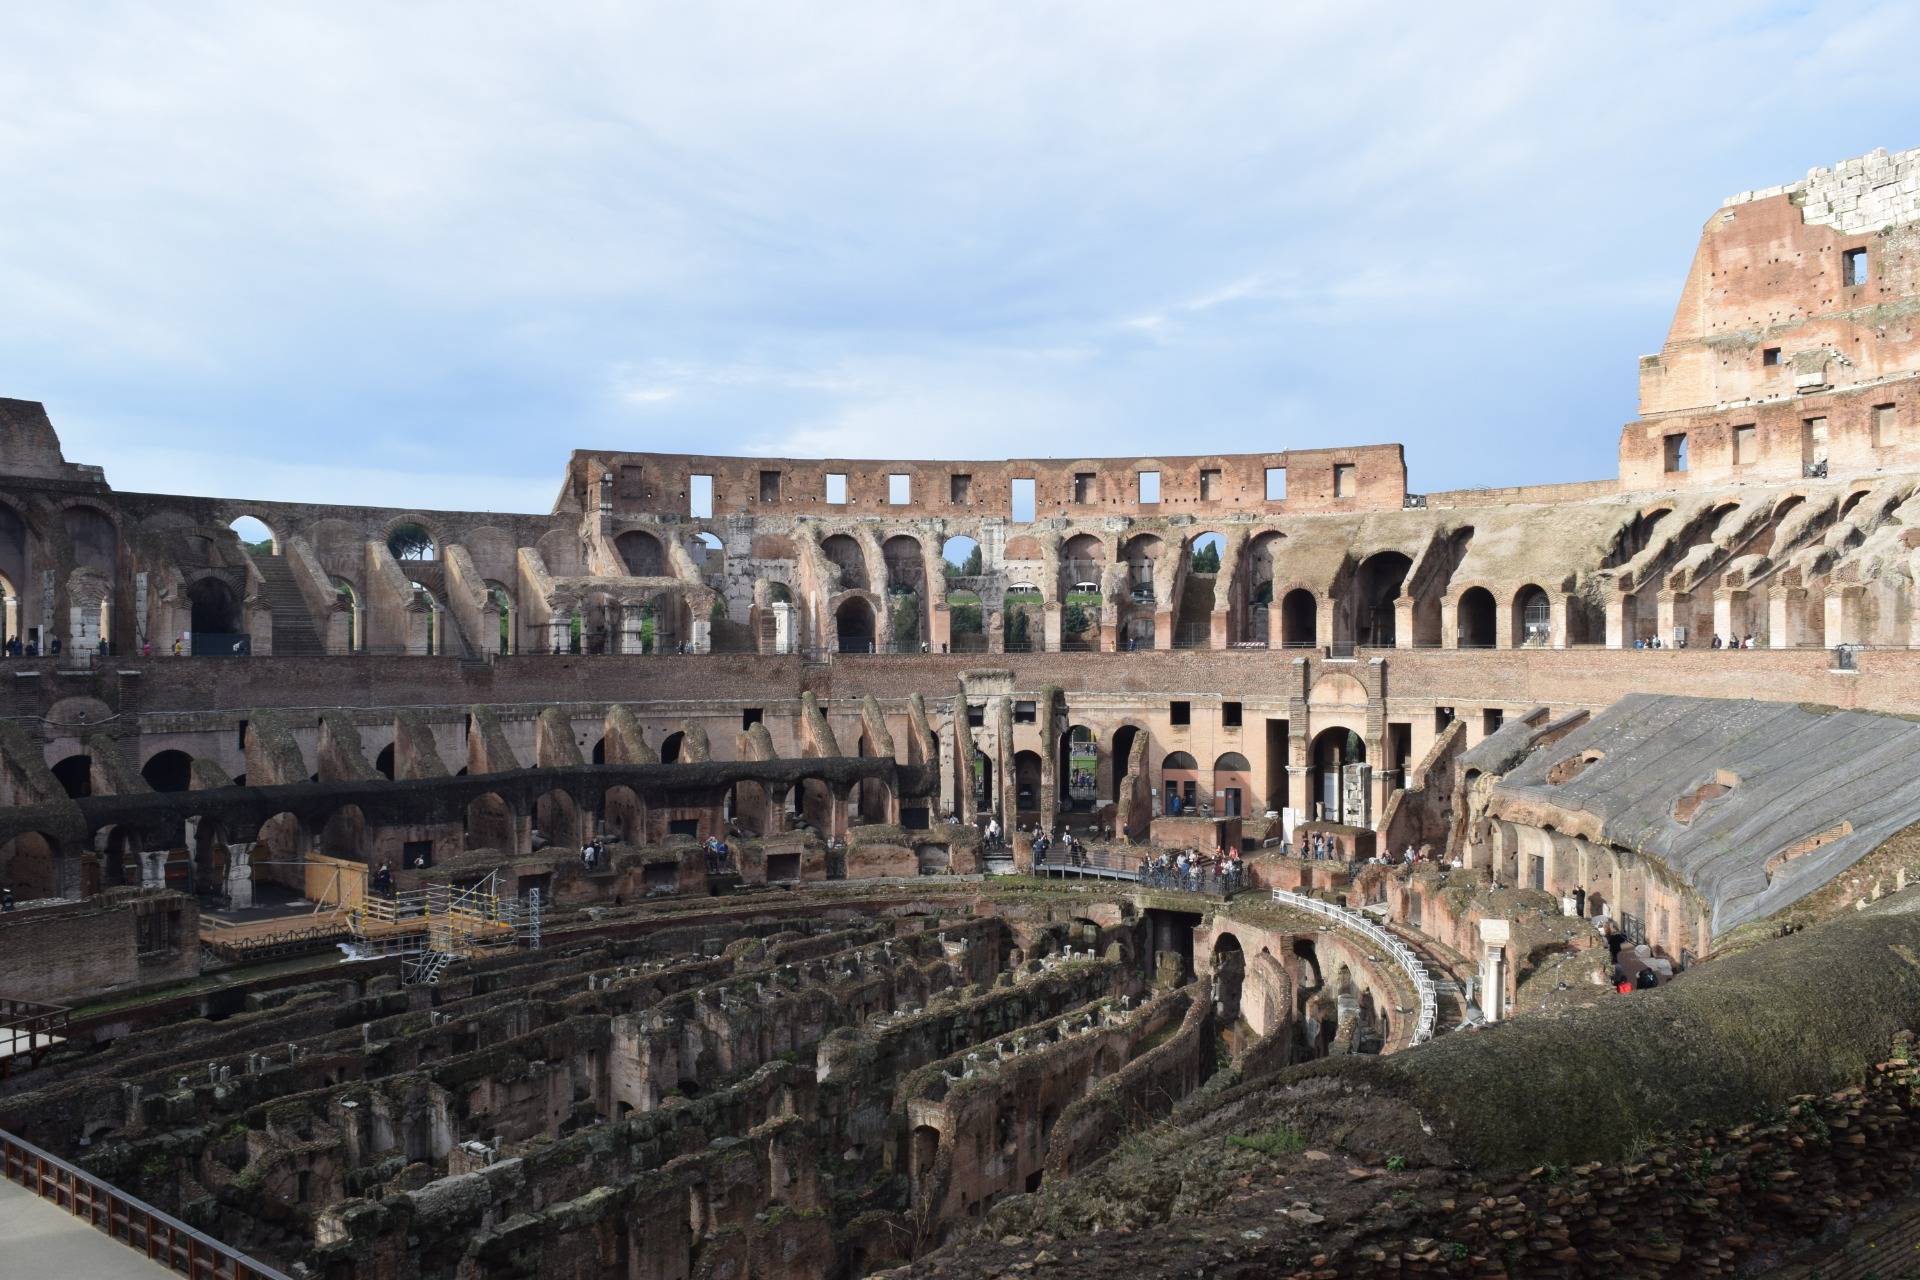 View from the upper level of the Colosseum